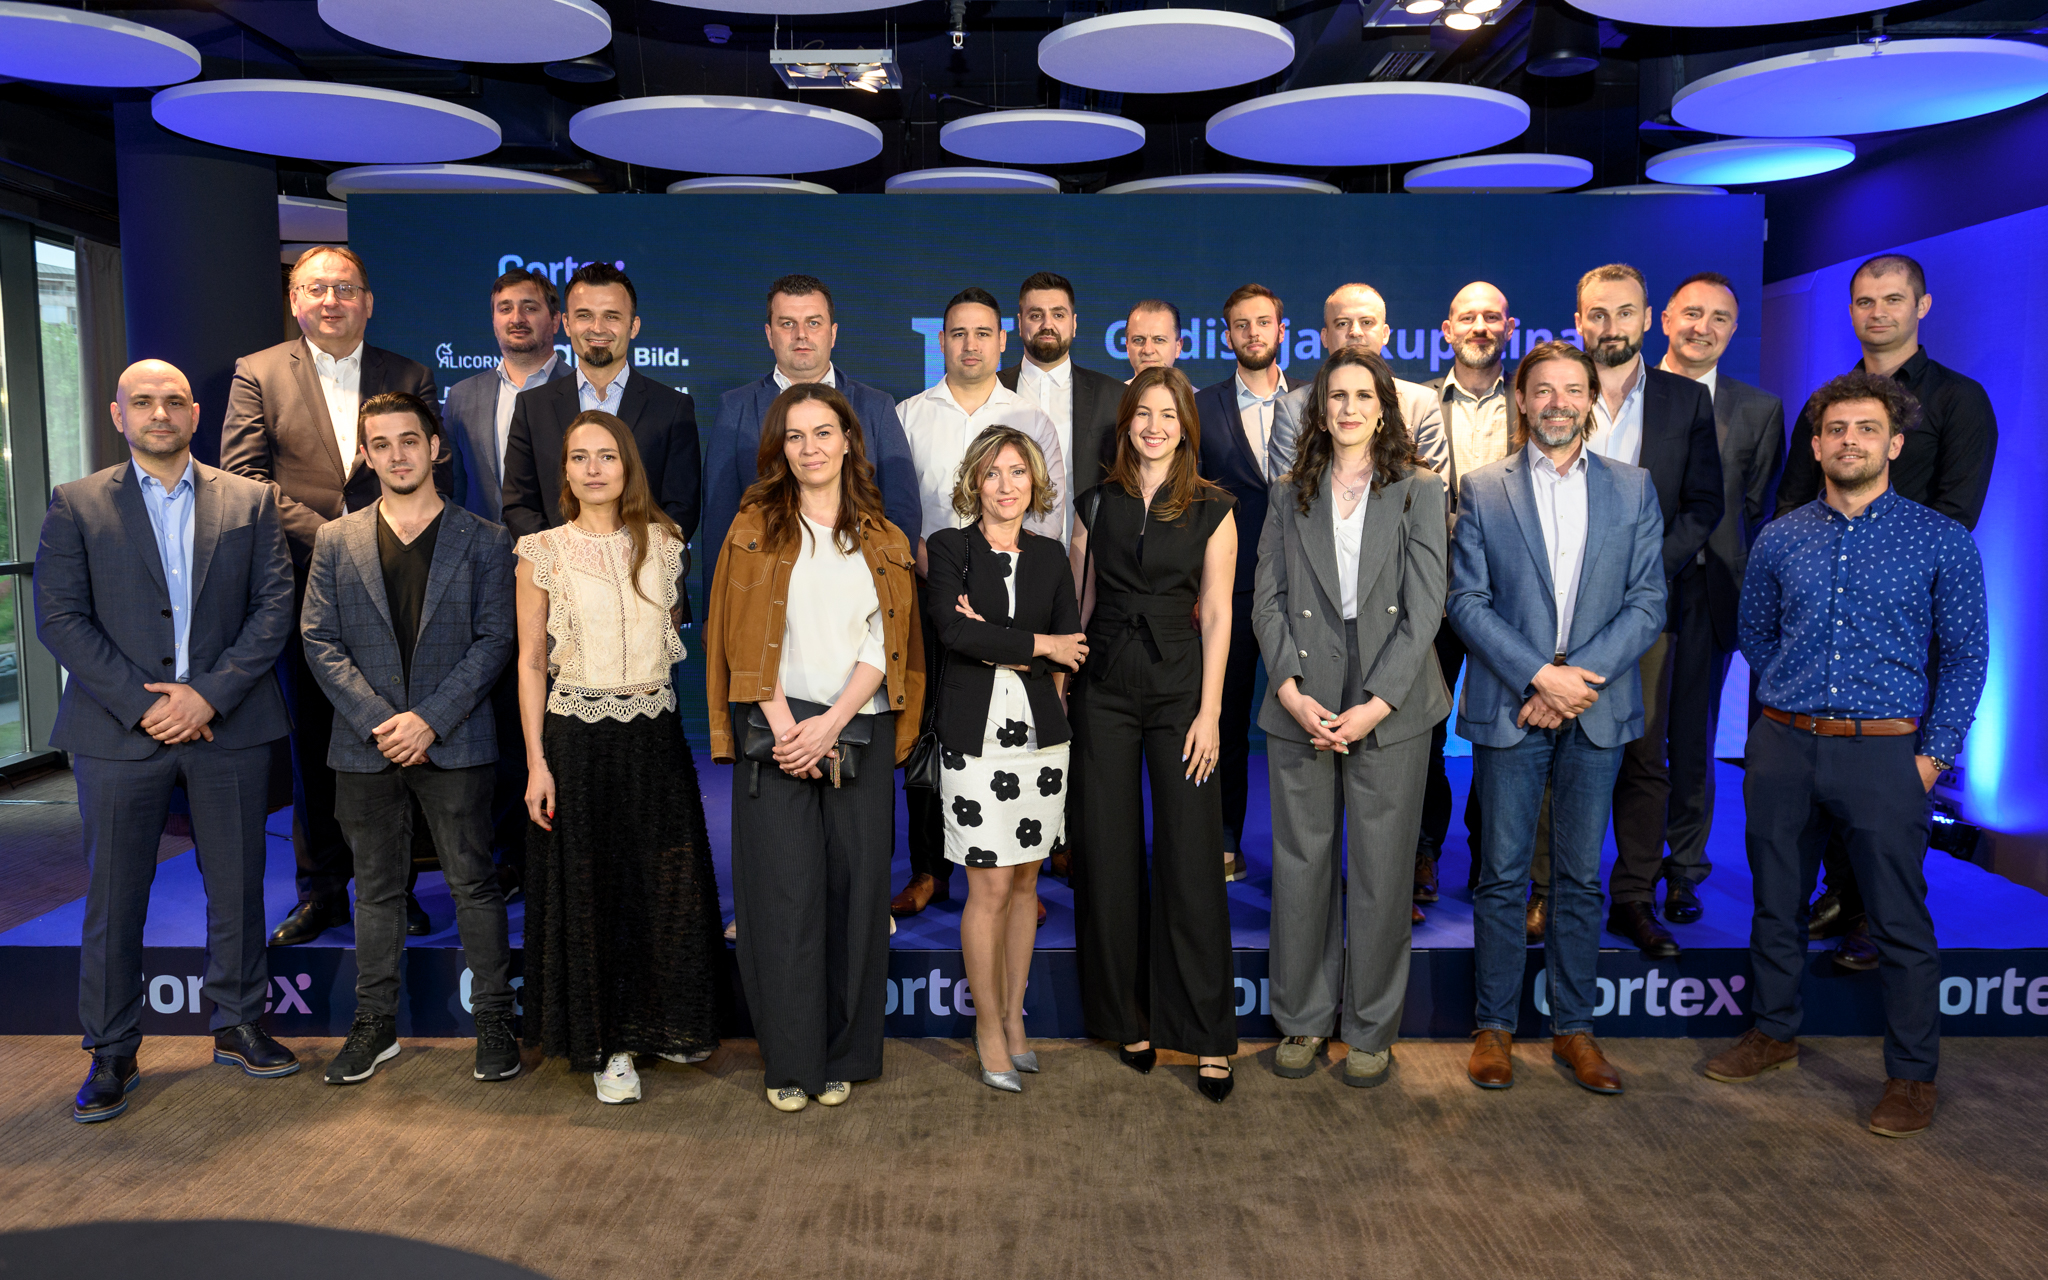 The third year anniversary of the Montenegrin Information Technology Cluster was celebrated: ICT companies collectively continue to strengthen the IT industry in Montenegro.